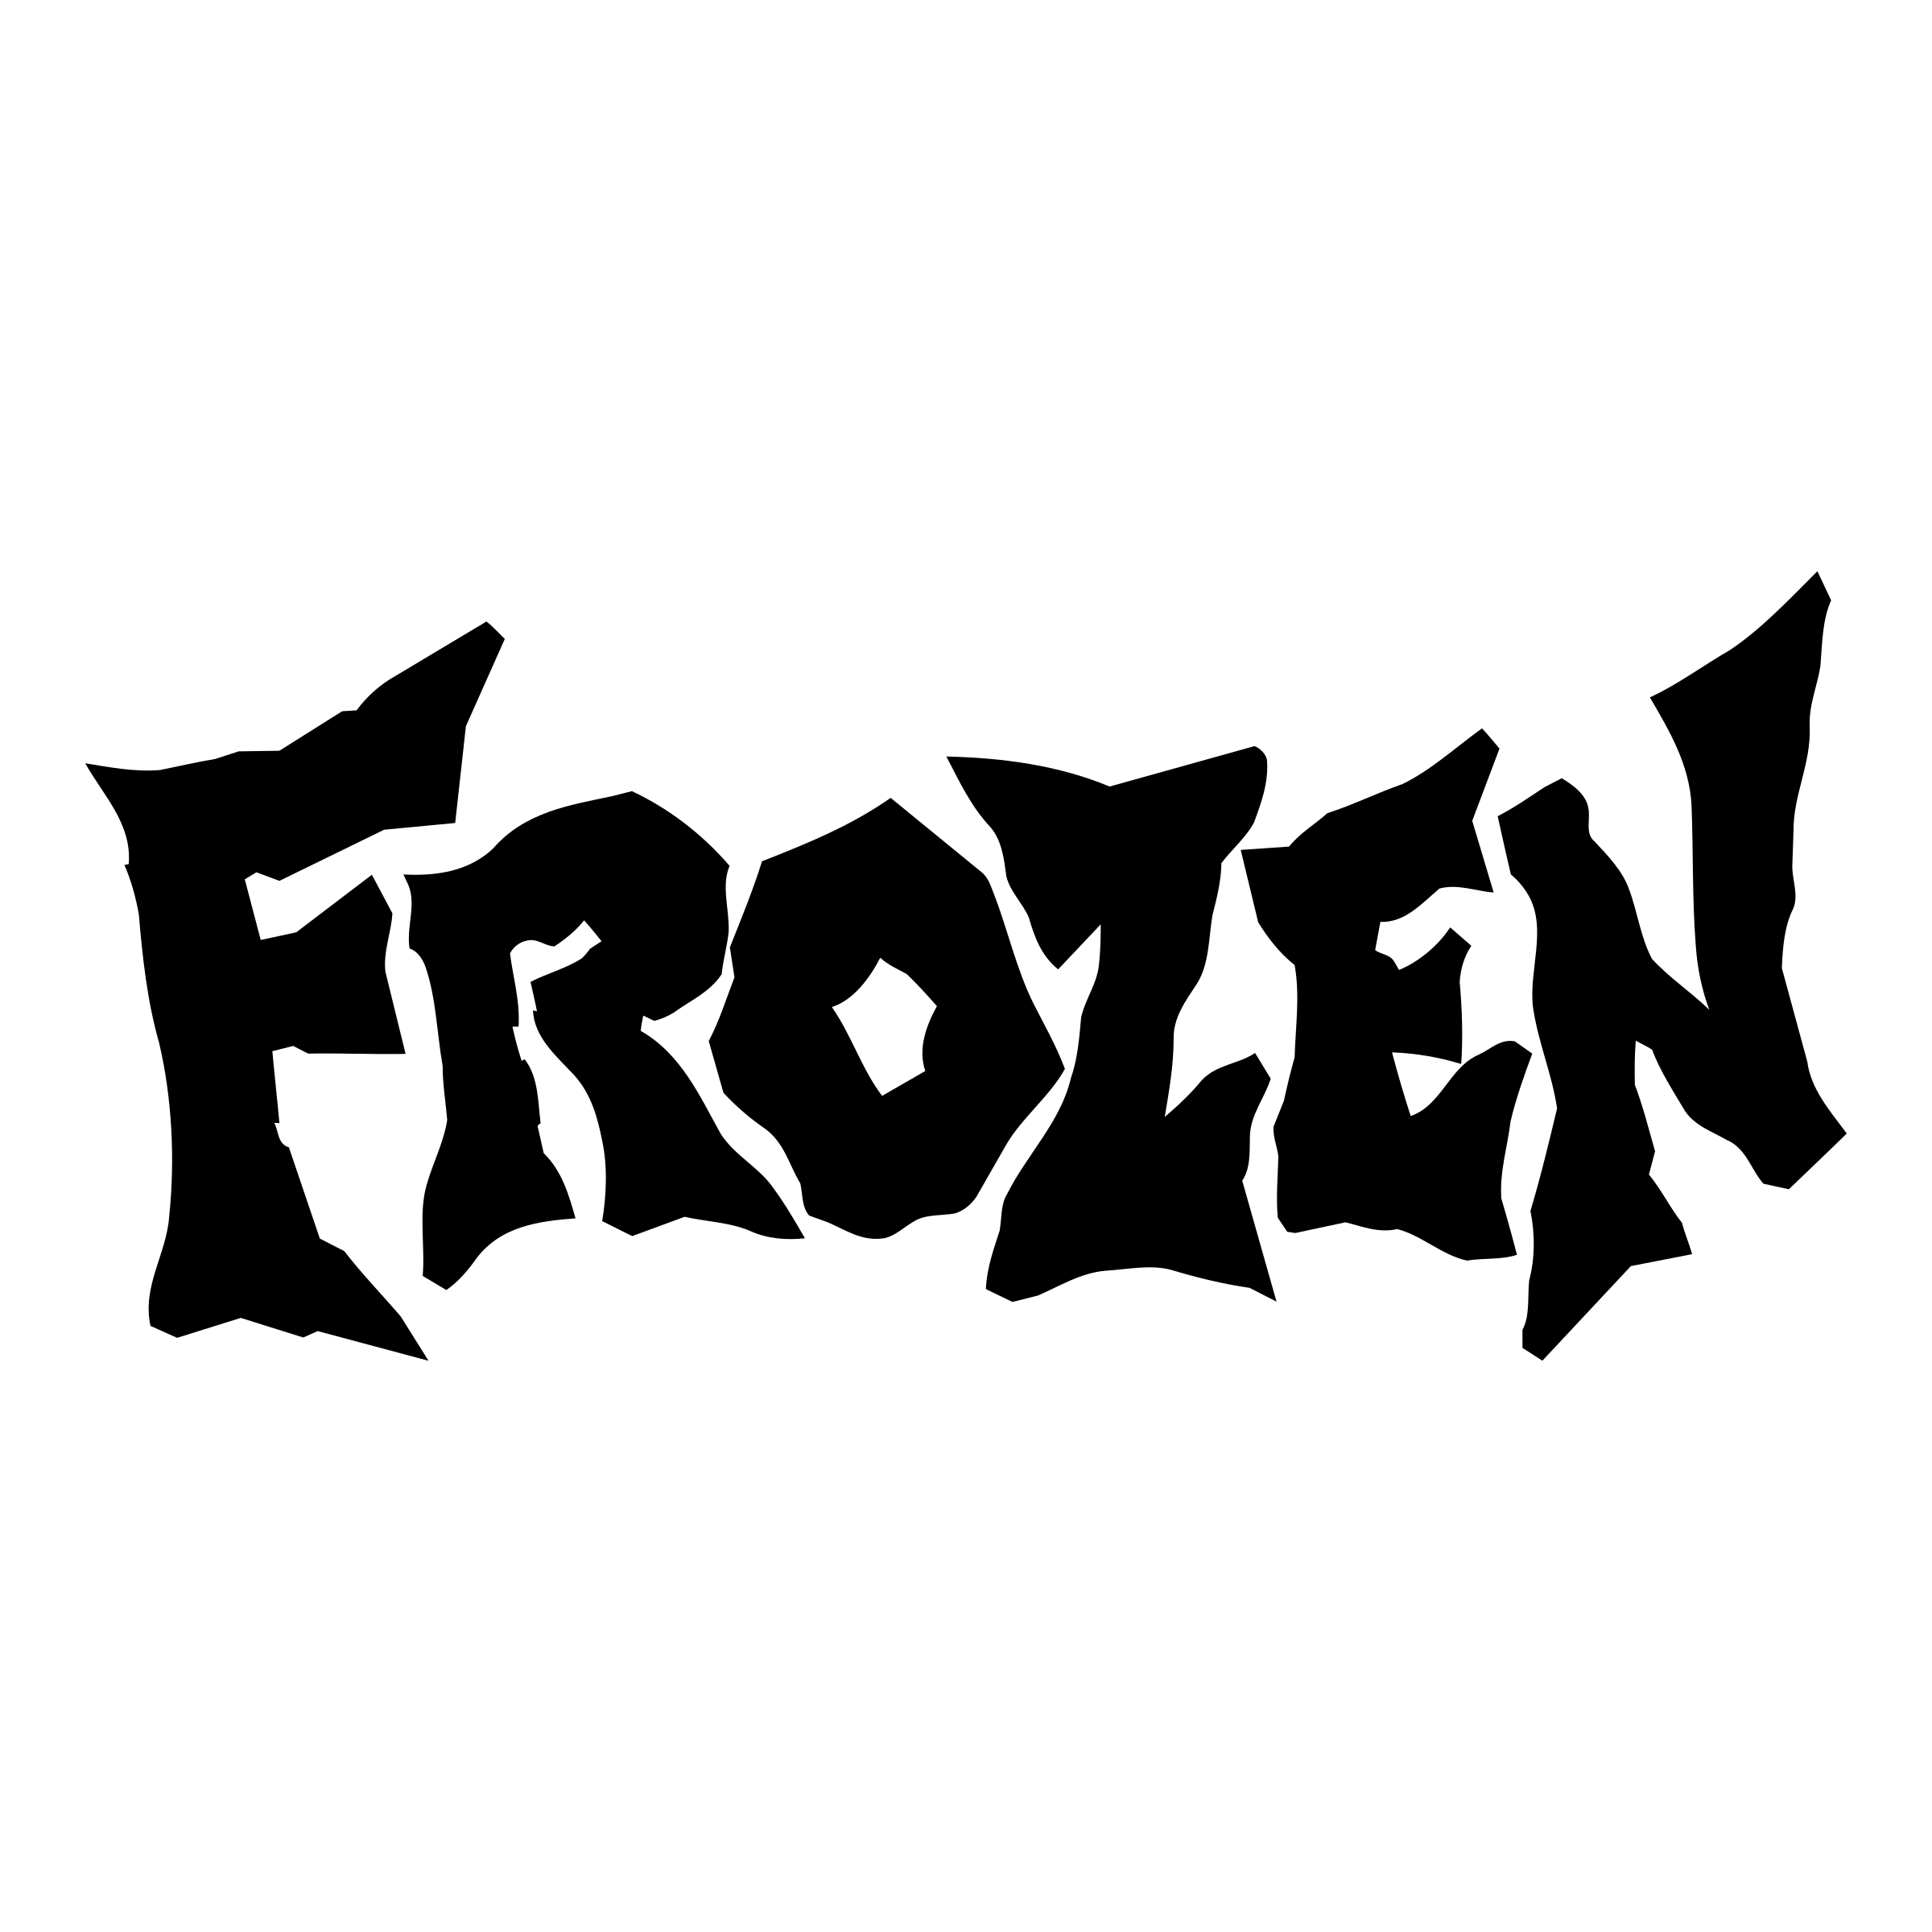 Frozen Black and White Logo - Frozen Logo Png (99+ images in Collection) Page 1